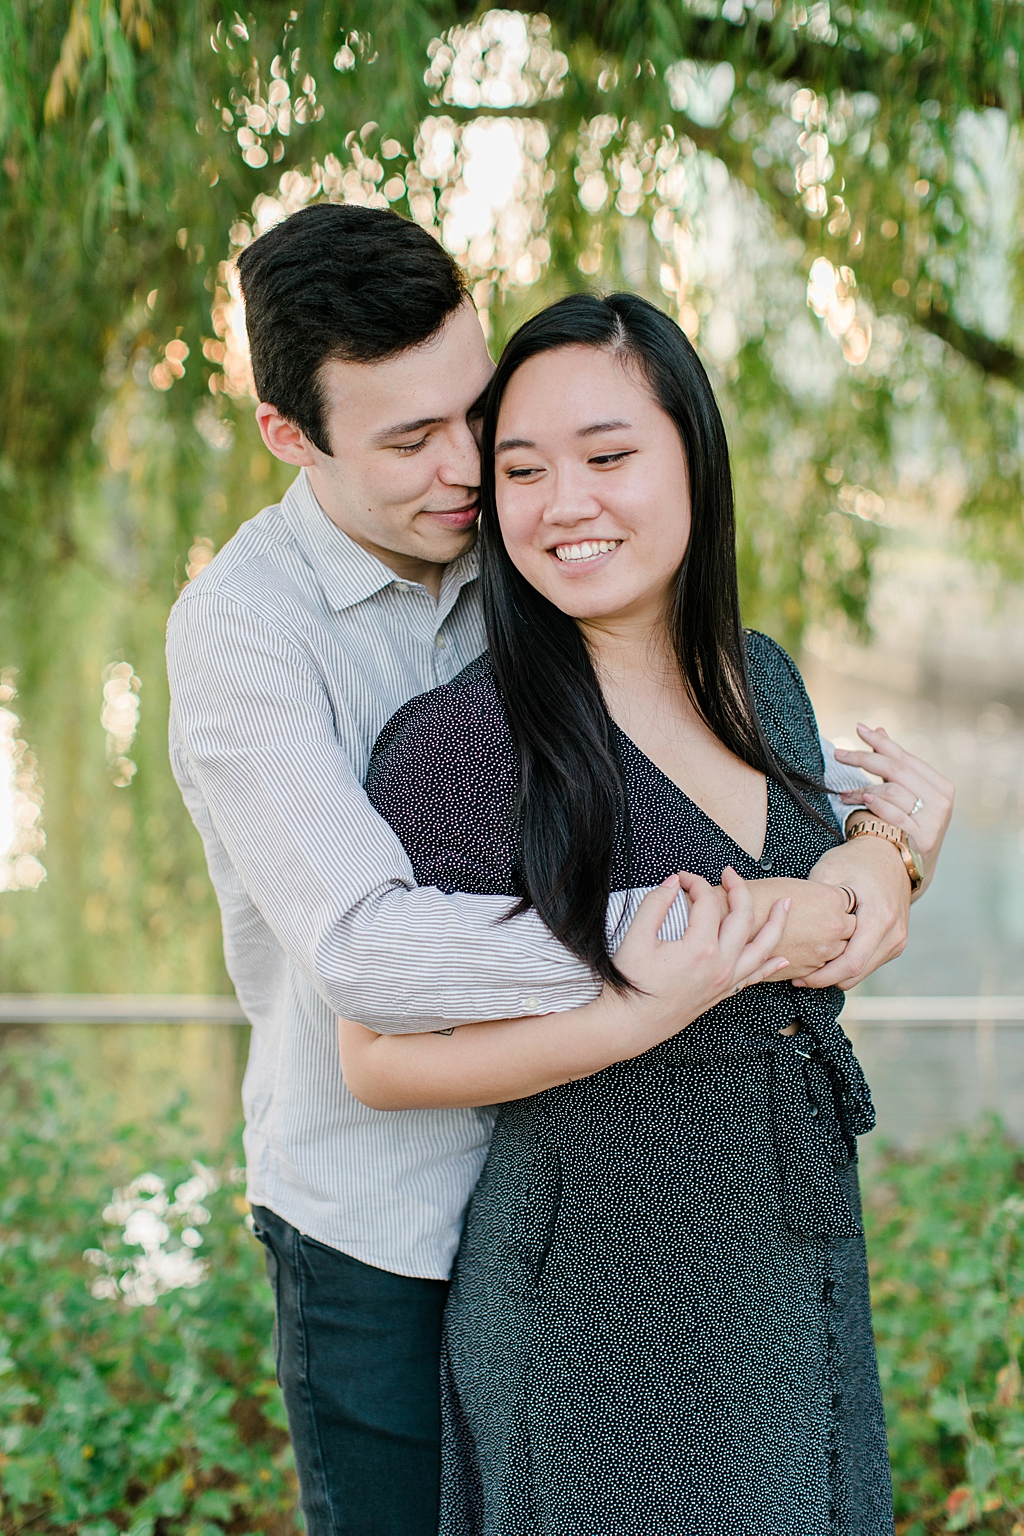 Becky_Collin_Navy_Yards_Park_The_Wharf_Washington_DC_Fall_Engagement_Session_AngelikaJohnsPhotography-7824.jpg